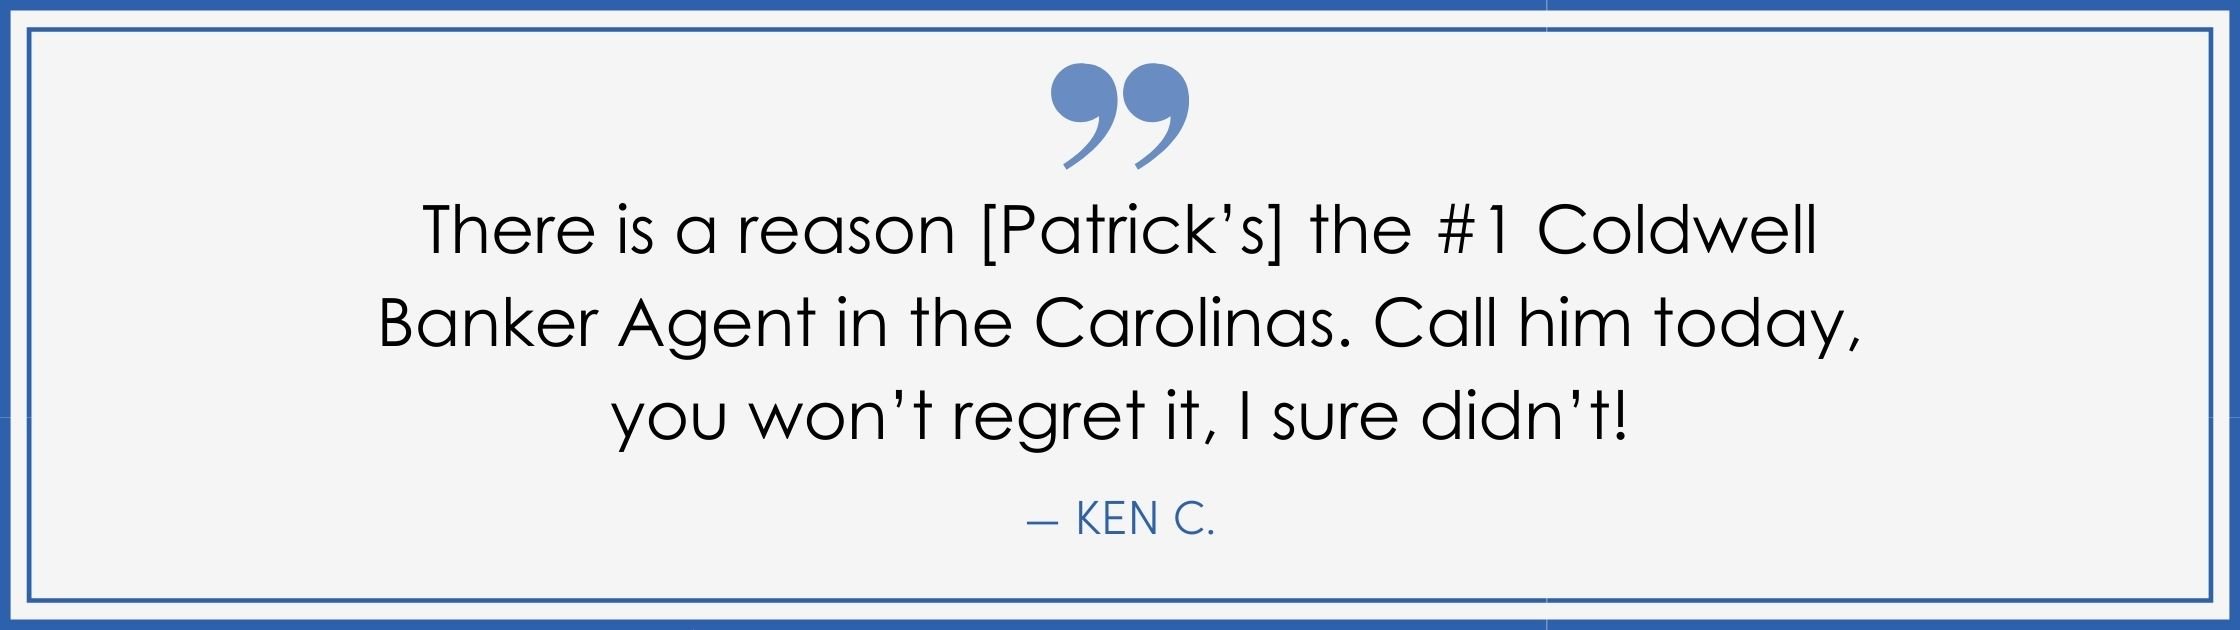 “There is a reason [Patrick’s] the #1 Coldwell Banker agent in the Carolinas. Call him today, you won’t regret it, I sure didn’t! –Ken C. (Copy) (Copy)